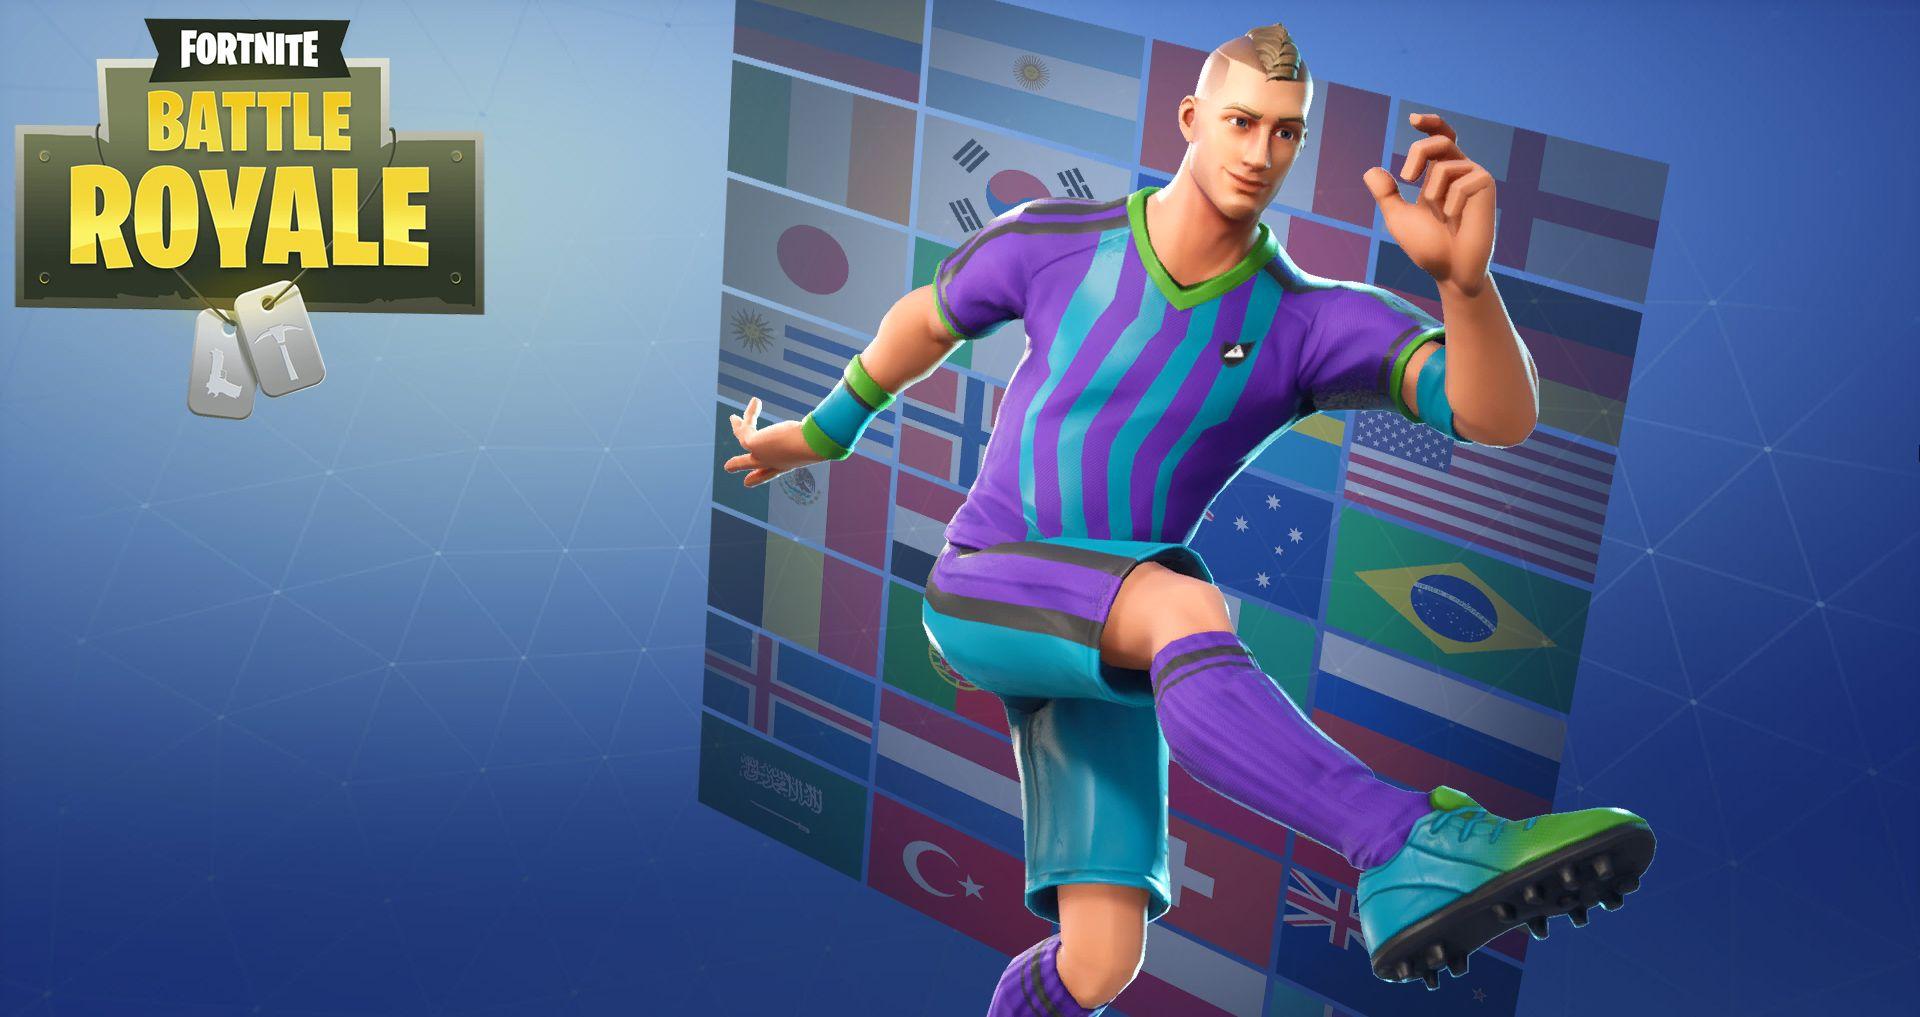 Aerial Threat Fortnite Outfit Skin How to Get + Details